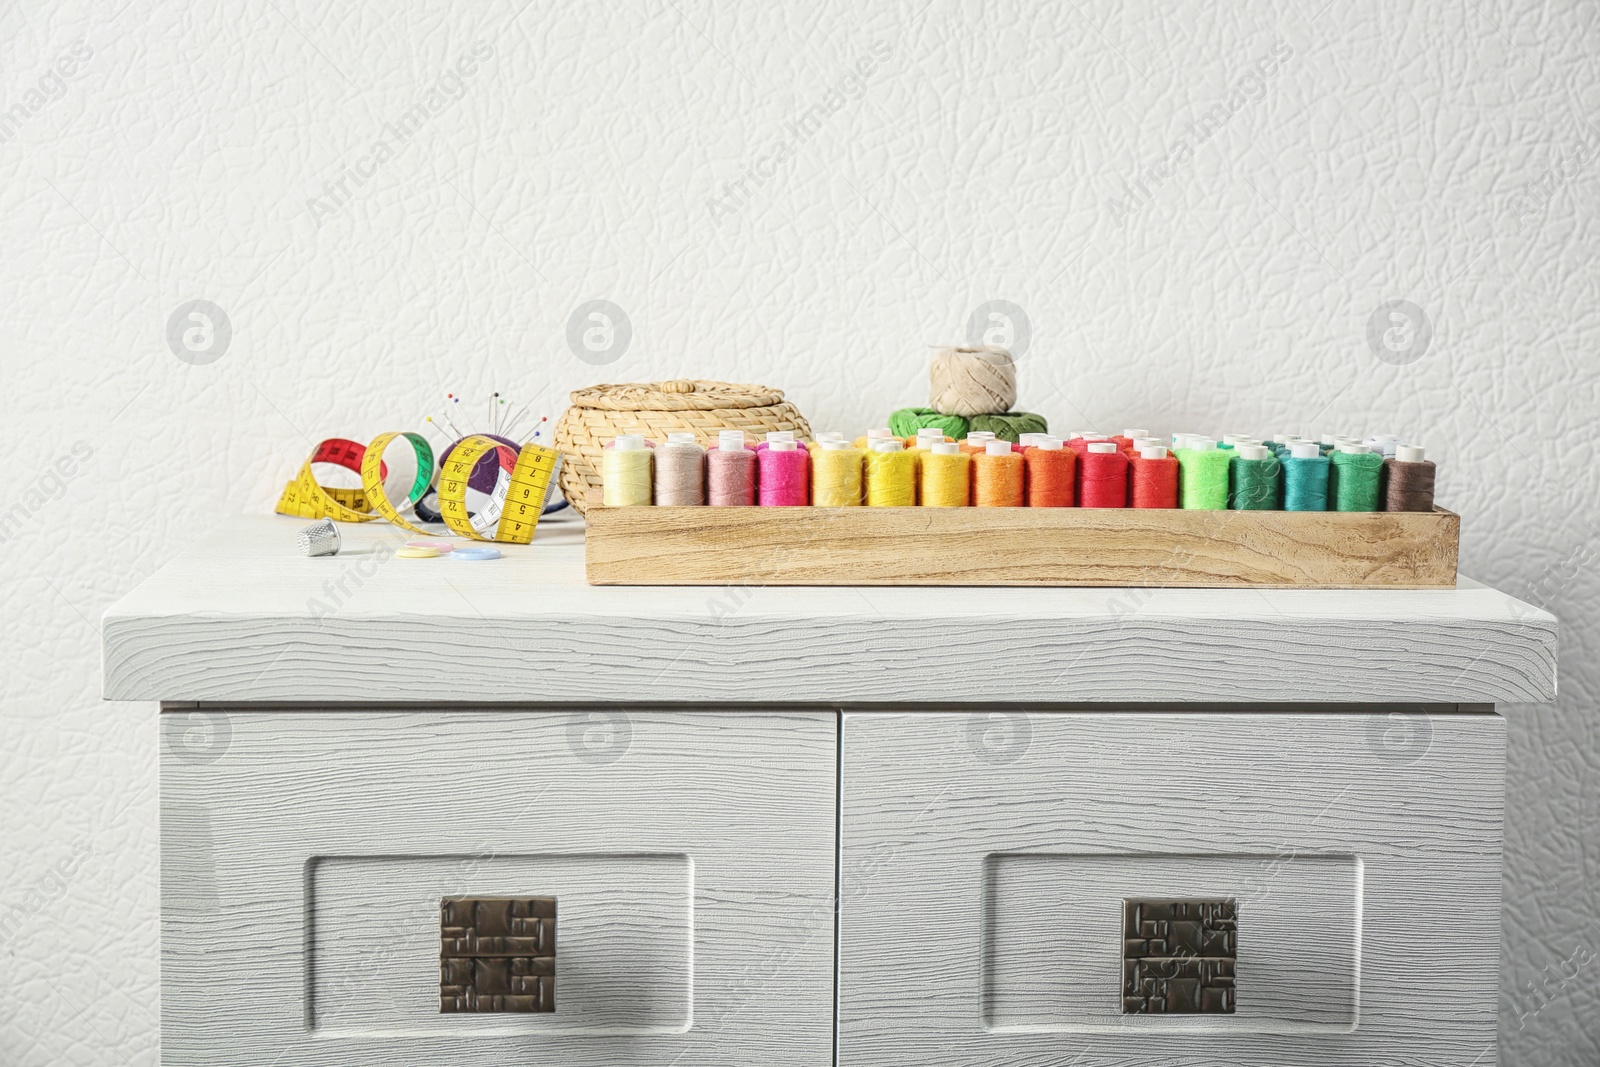 Photo of Wooden box with color sewing threads on cabinet